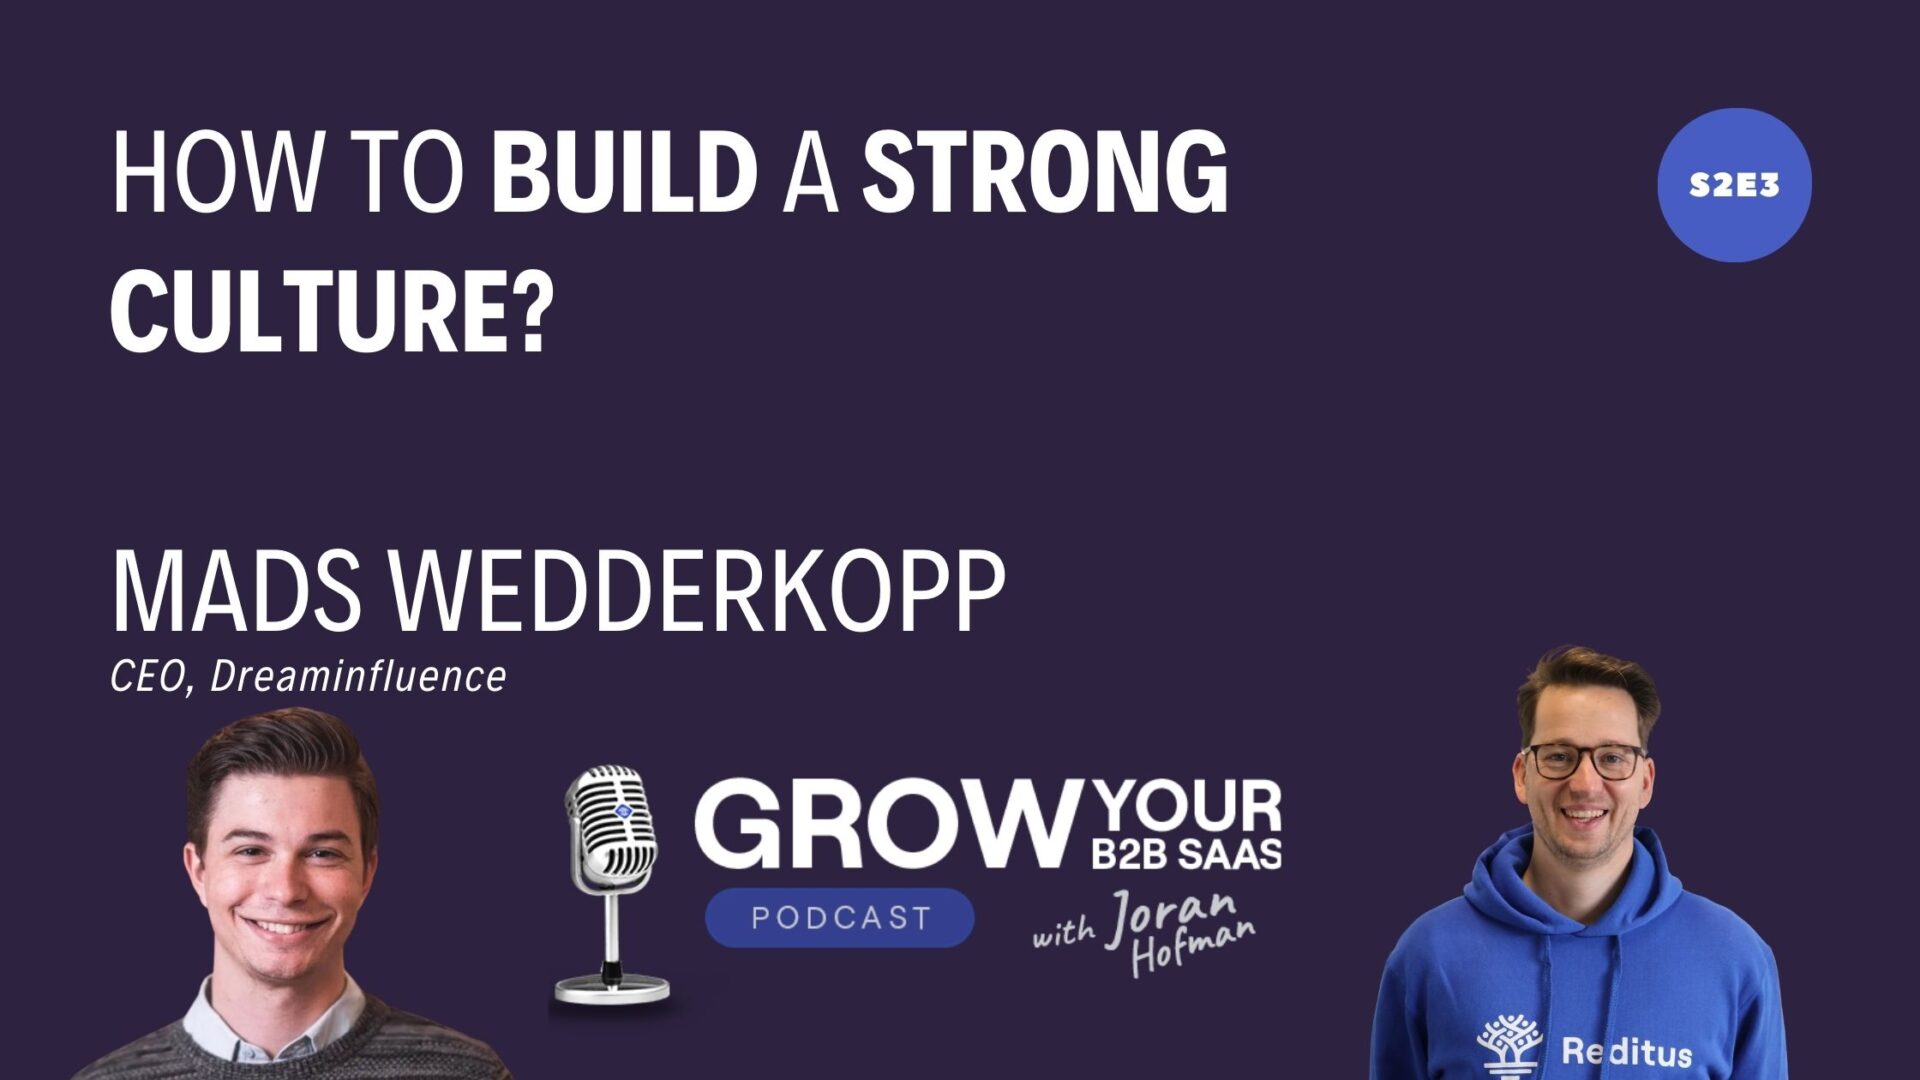 https://www.getreditus.com/podcast/s2e3-how-to-build-a-strong-culture-with-mads-wedderkopp/